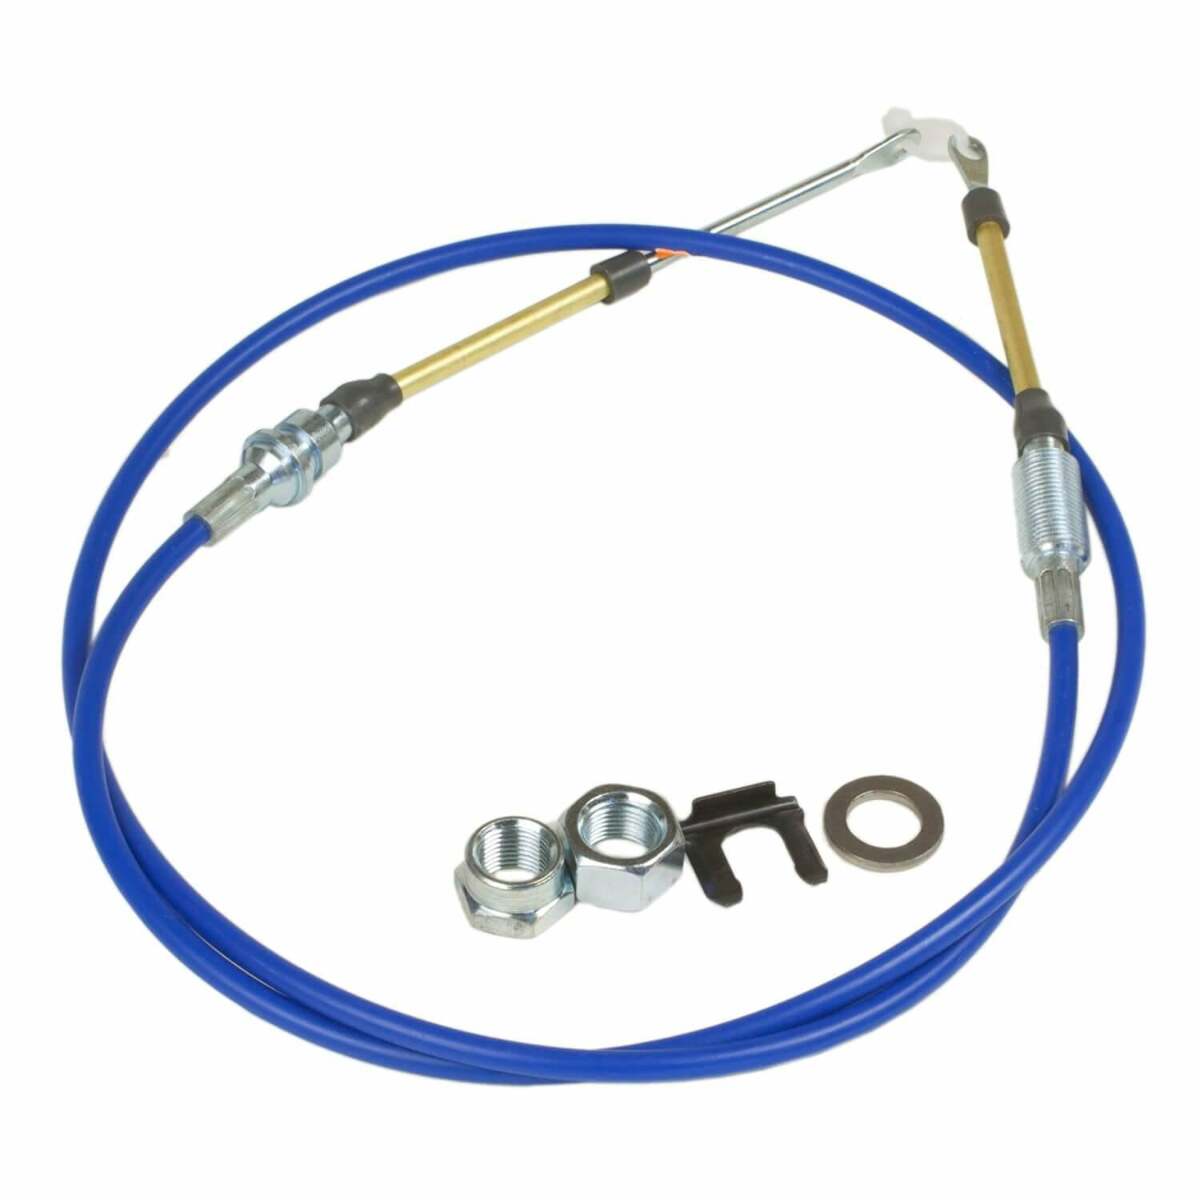 Hurst Shifter Cable - 5-Foot Length - Blue - 5000029